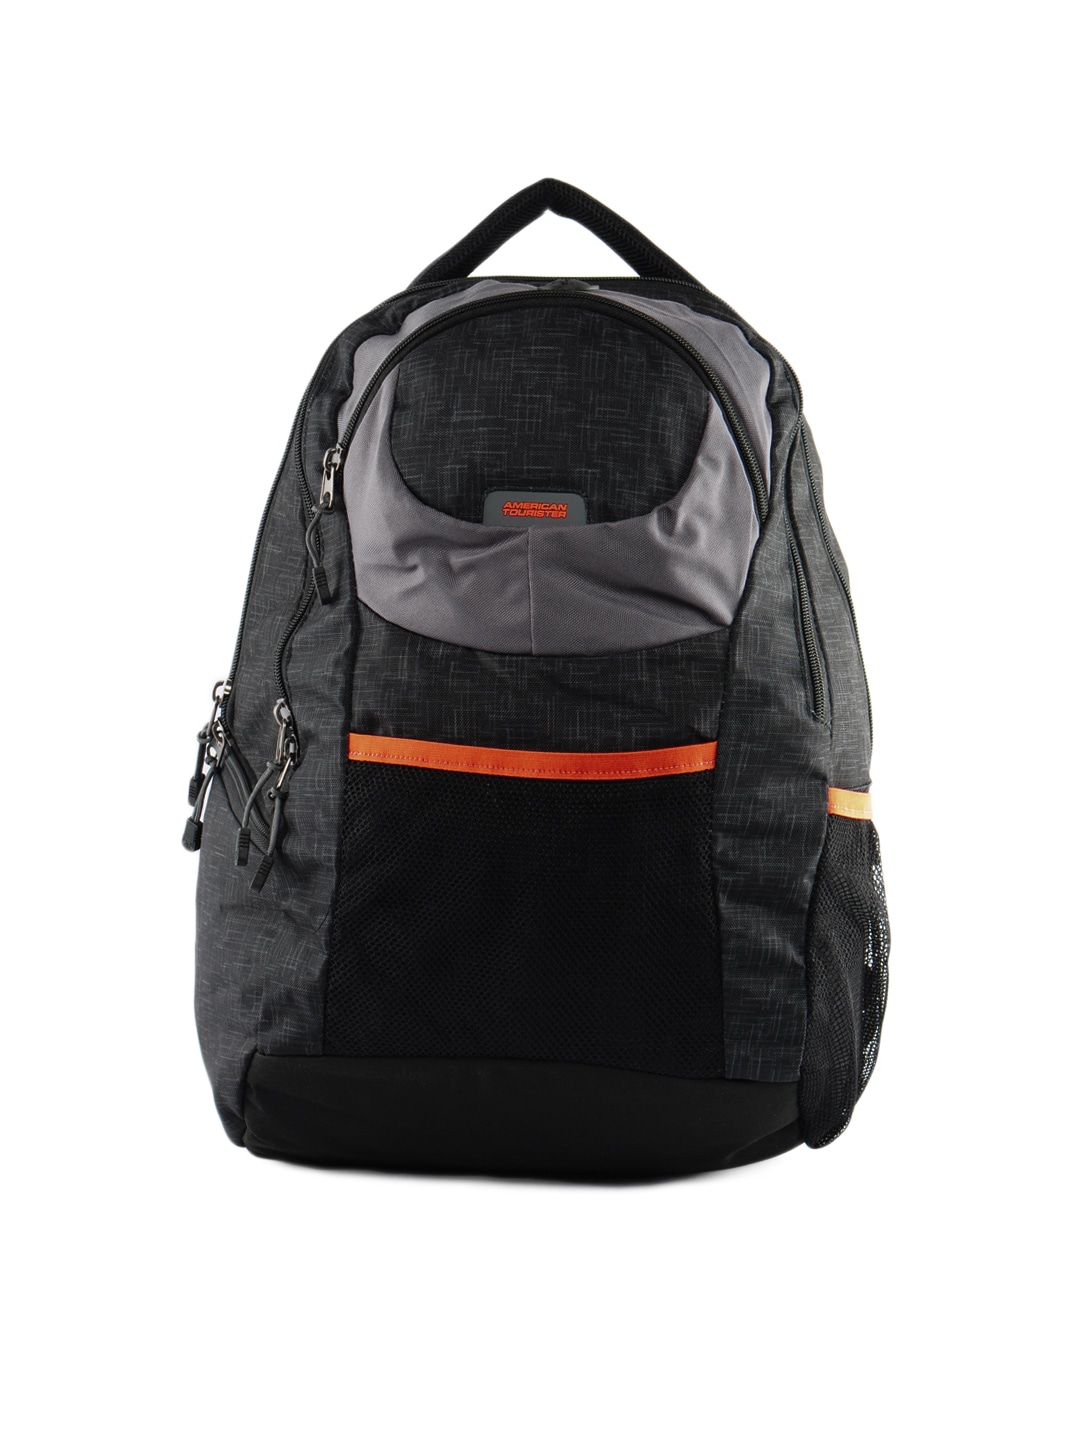 American Tourister Unisex Buzz Black Backpack